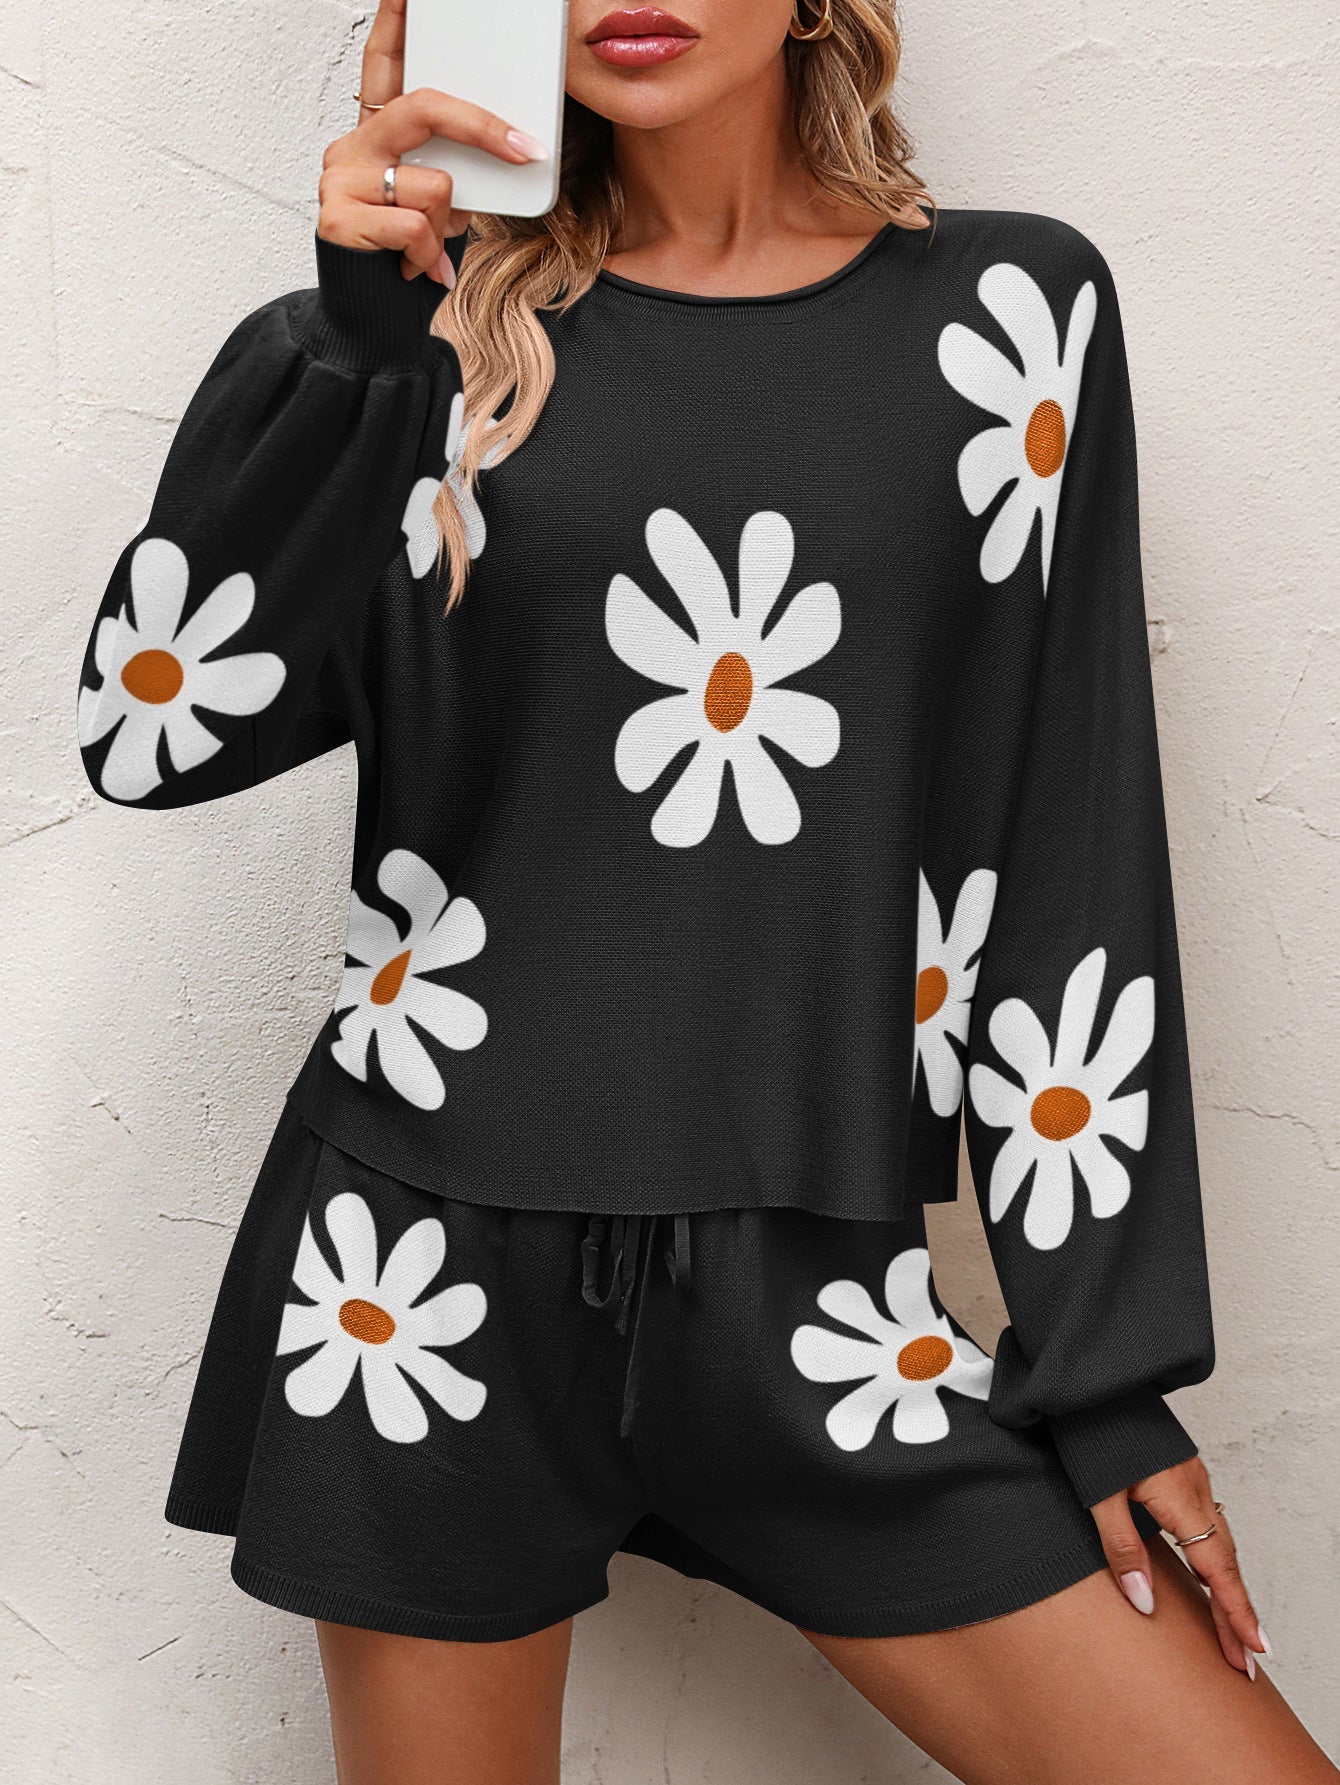 Floral Print Raglan Sleeve Knit Top and Tie Front Sweater Shorts Set Print on any thing USA/STOD clothes